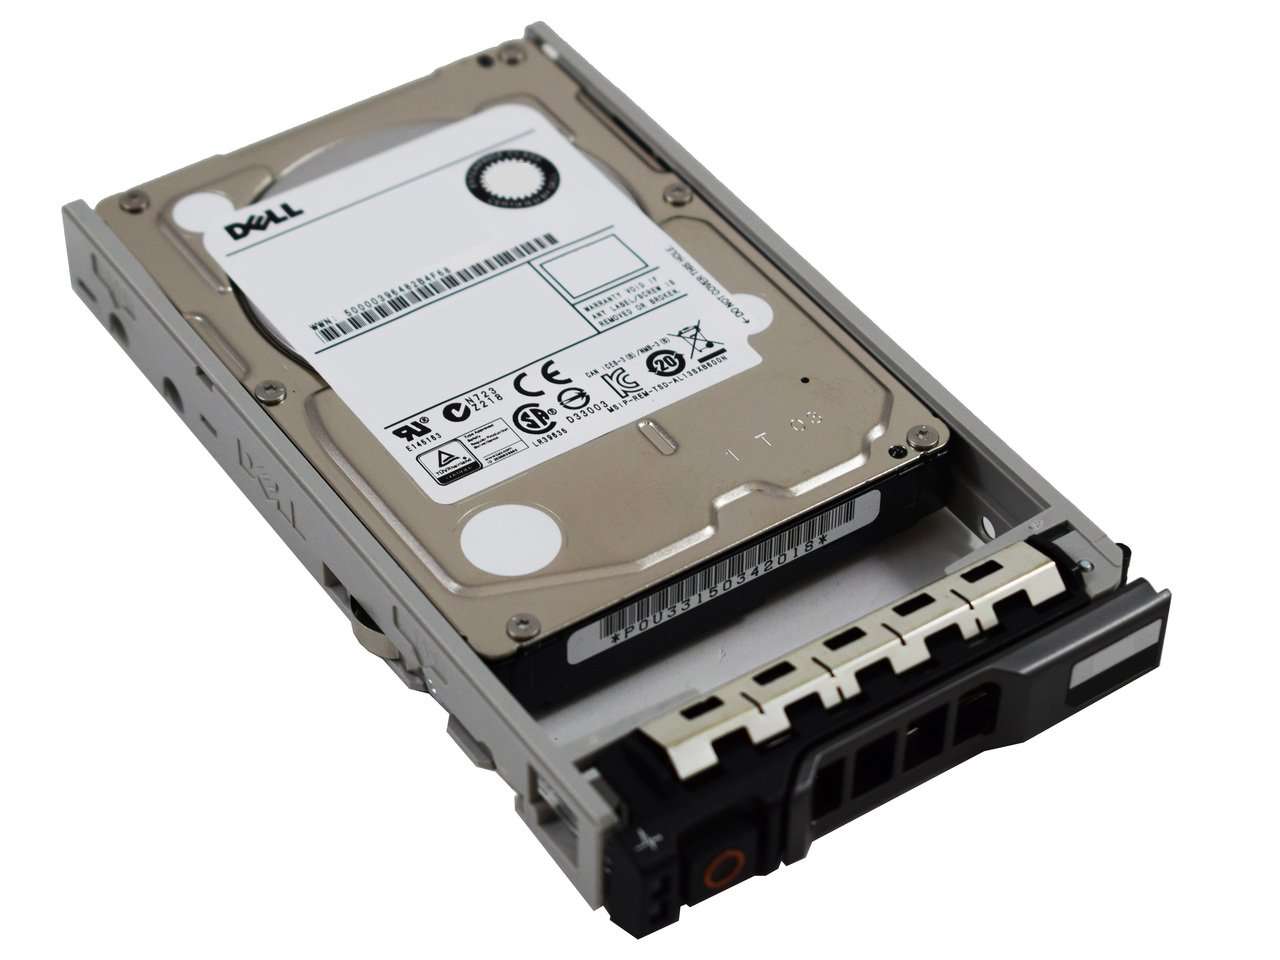 Dell G13 MHD2P 1.2TB 10K RPM SAS 12Gb/s 512n 2.5" SED Manufacturer Recertified HDD